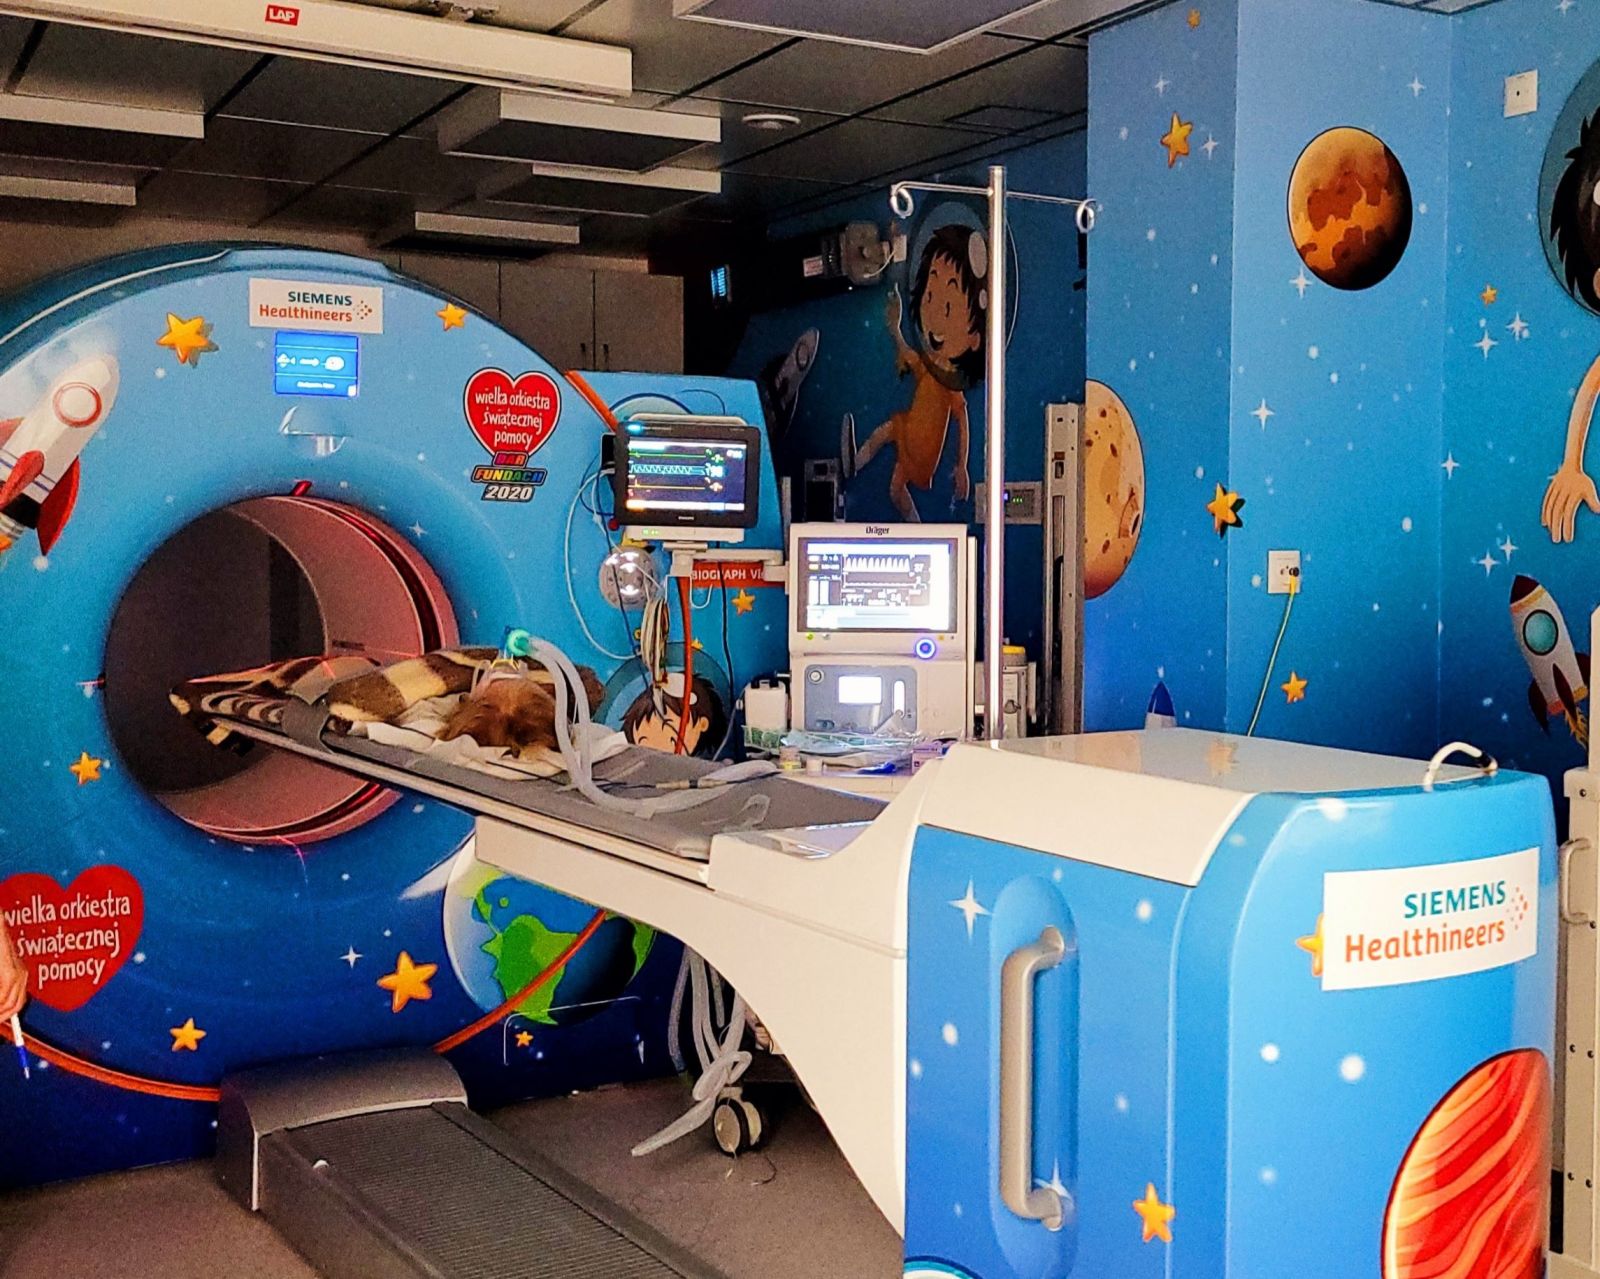 A 100th test with the use of the PET-CT scanner, photo: Children's Memorial Health Institute